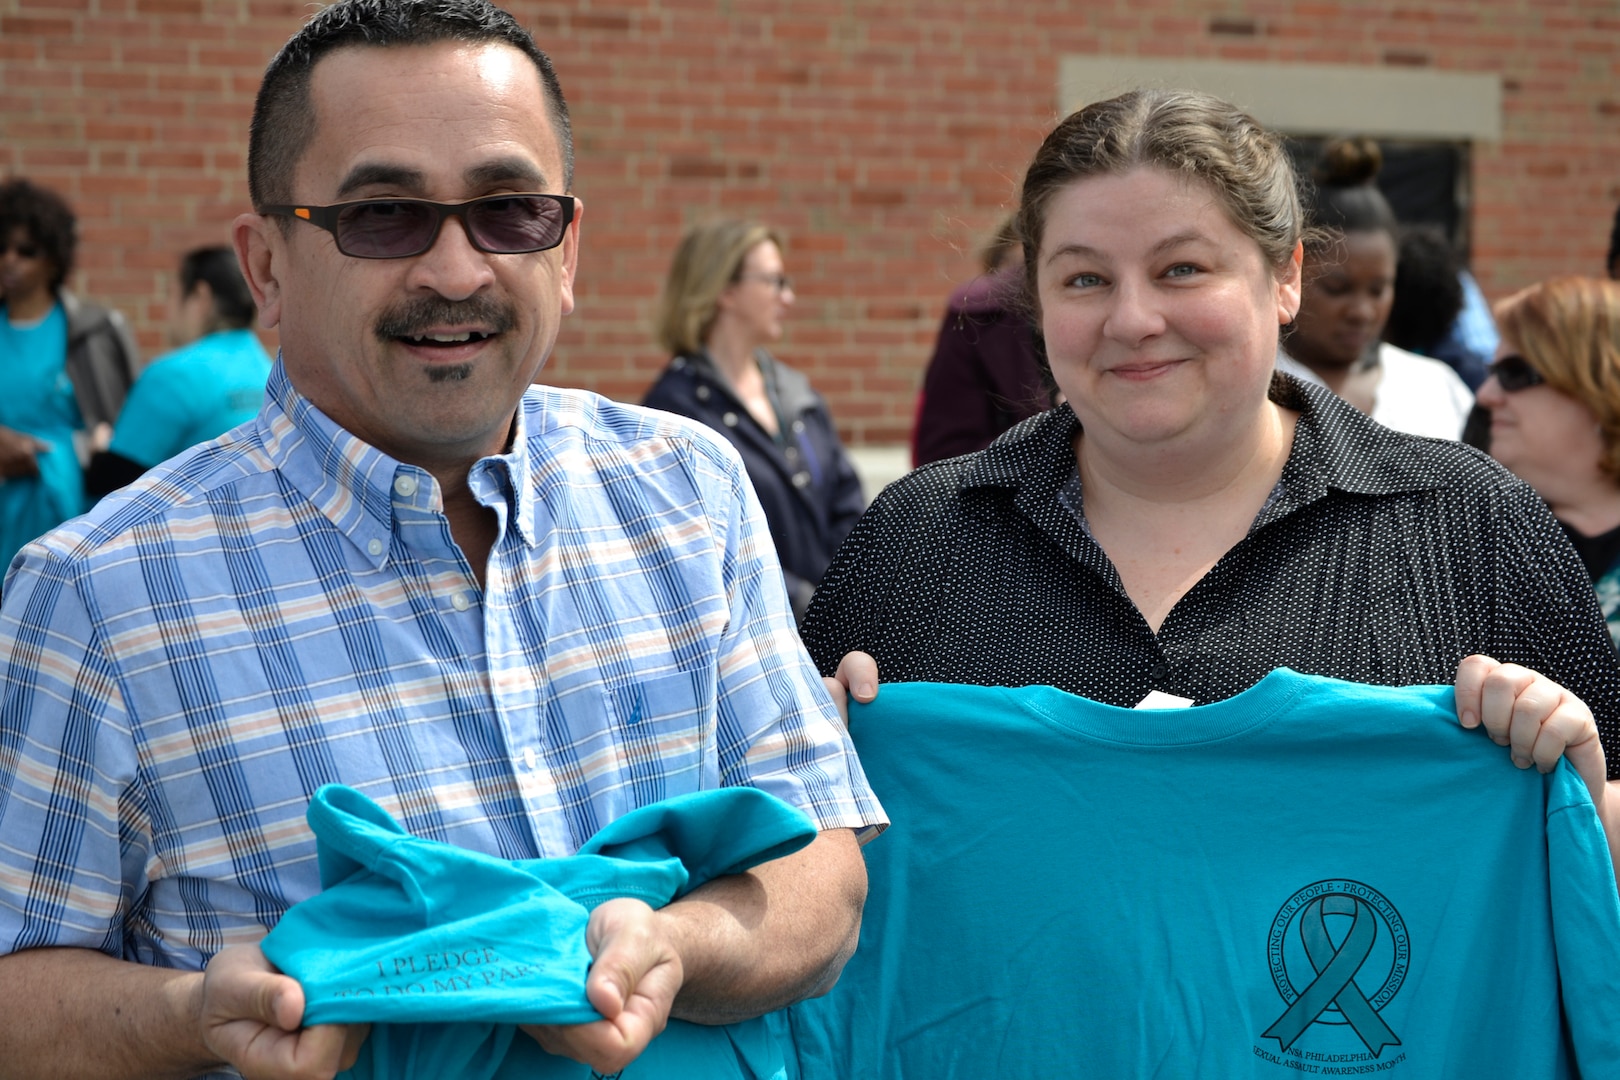 NSA Philadelphia tenant agencies come together for the “Walk a Mile in their Shoes” Sexual Assault Awareness and Prevention Month event on April 24.